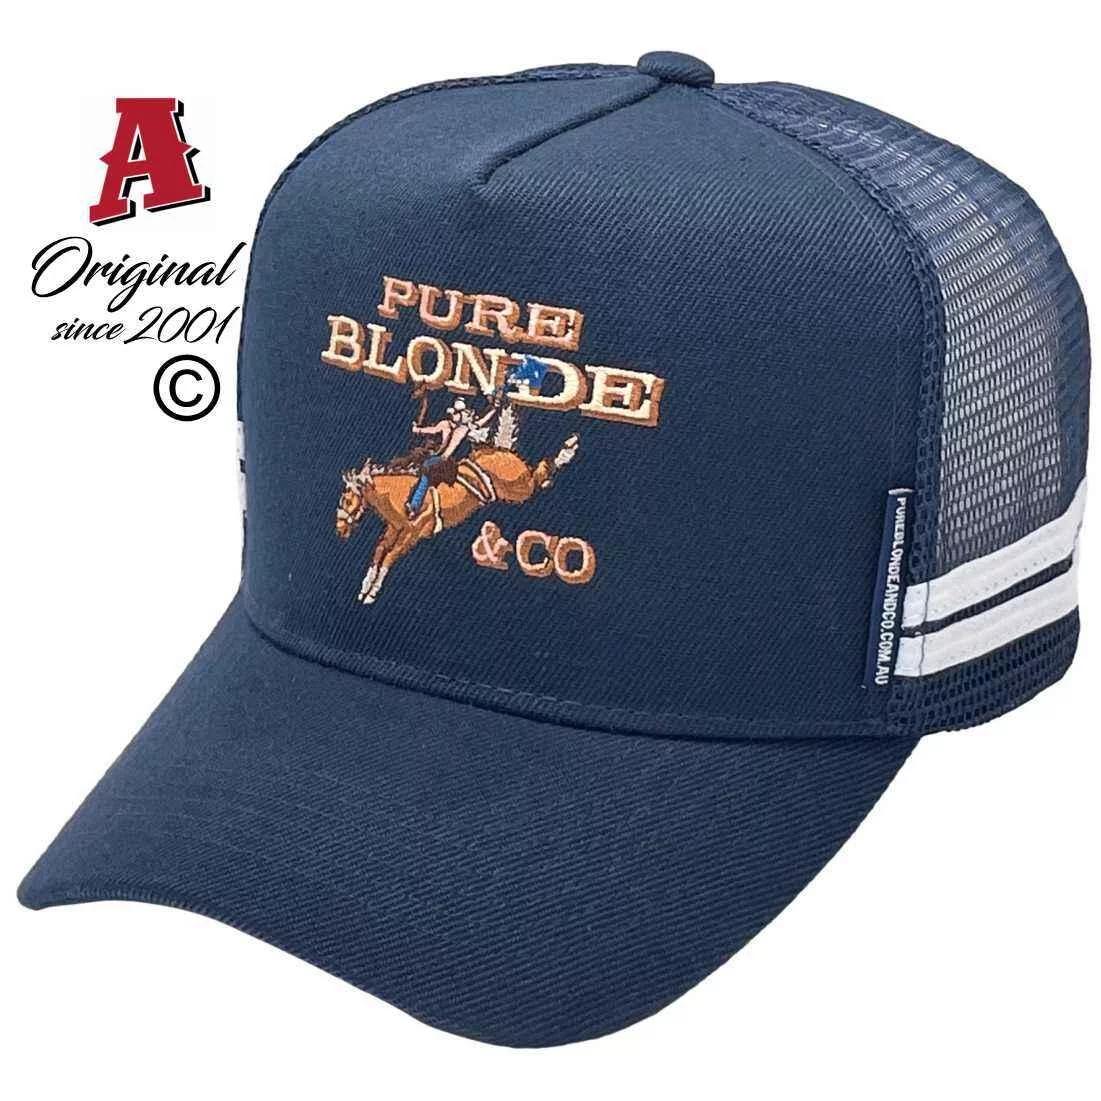 Pure Blond & Co Dubbo NSW HP Basic Aussie Trucker Hats with 2 SideBands and Australian HeadFit Crown Navy White